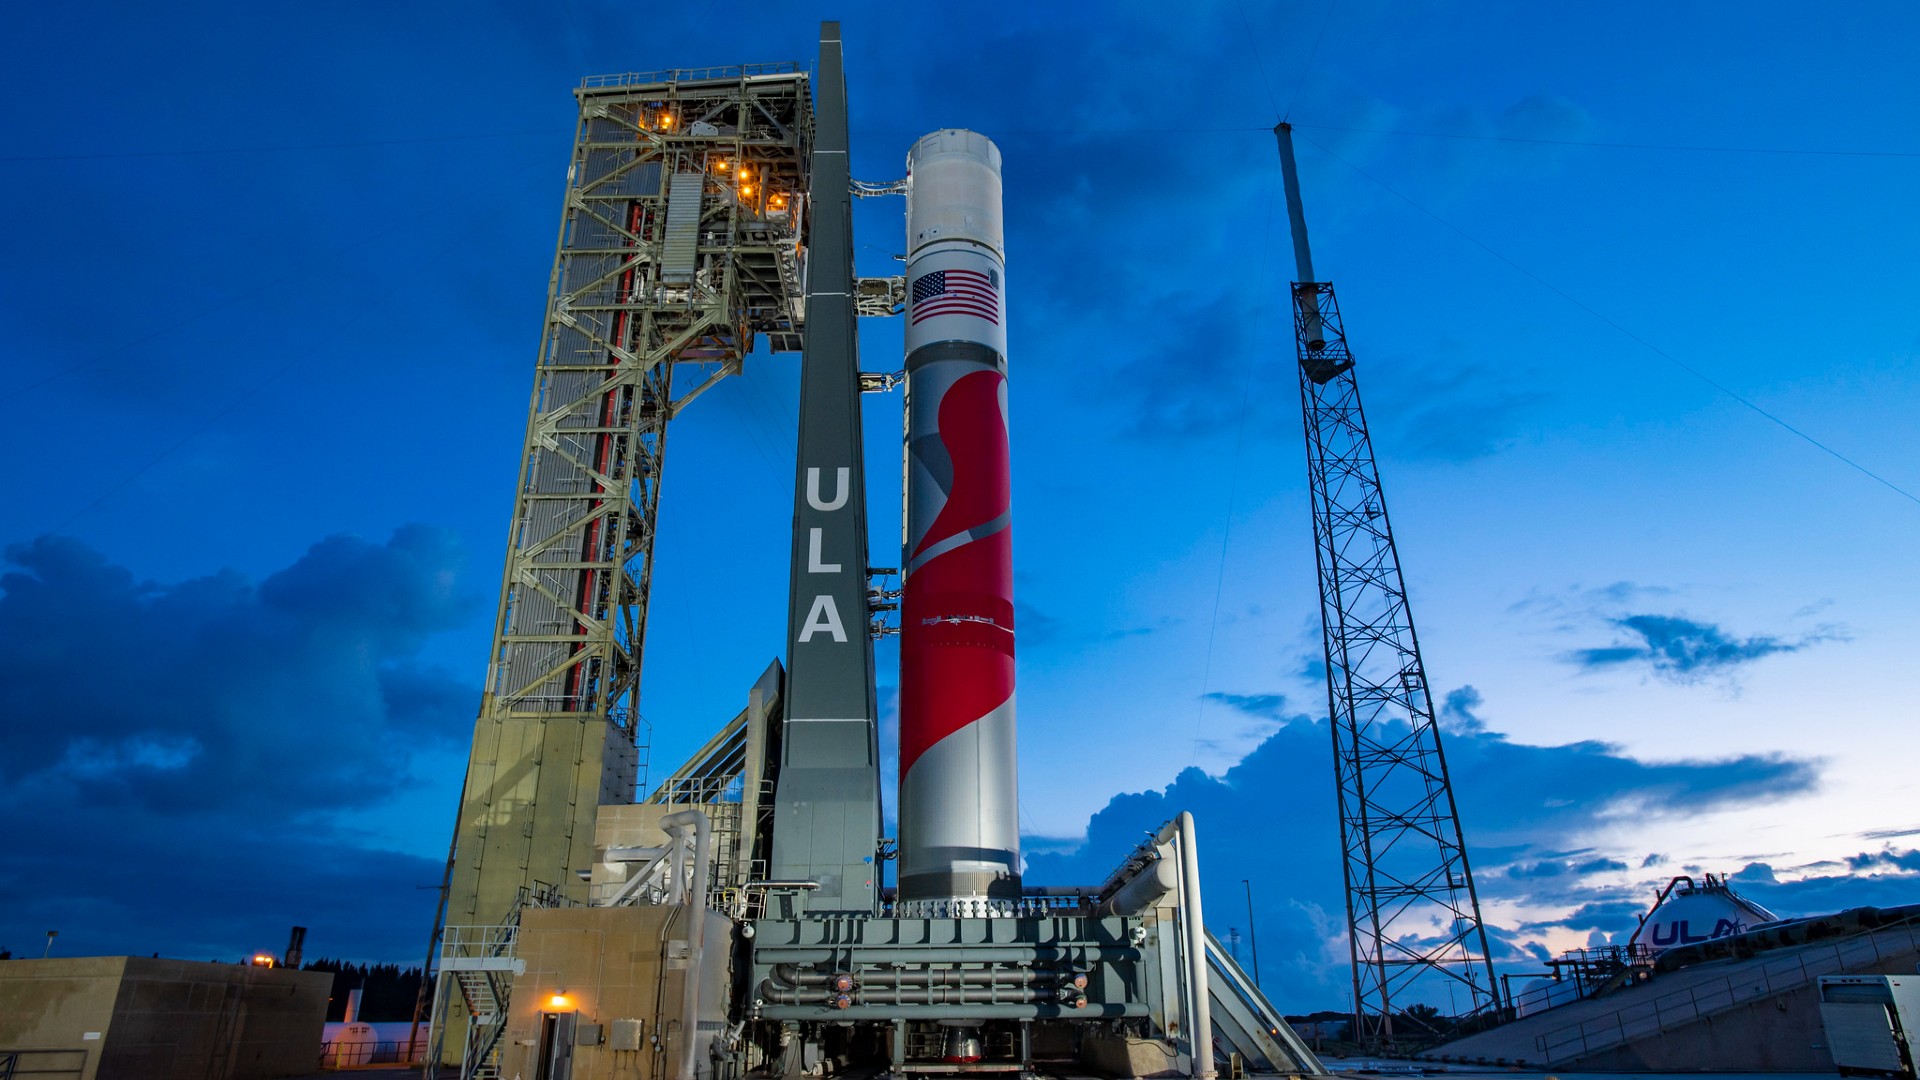 May 25 Could Mark the First Test-Firing of Engines on Launch Pad for the New Vulcan Centaur Rocket